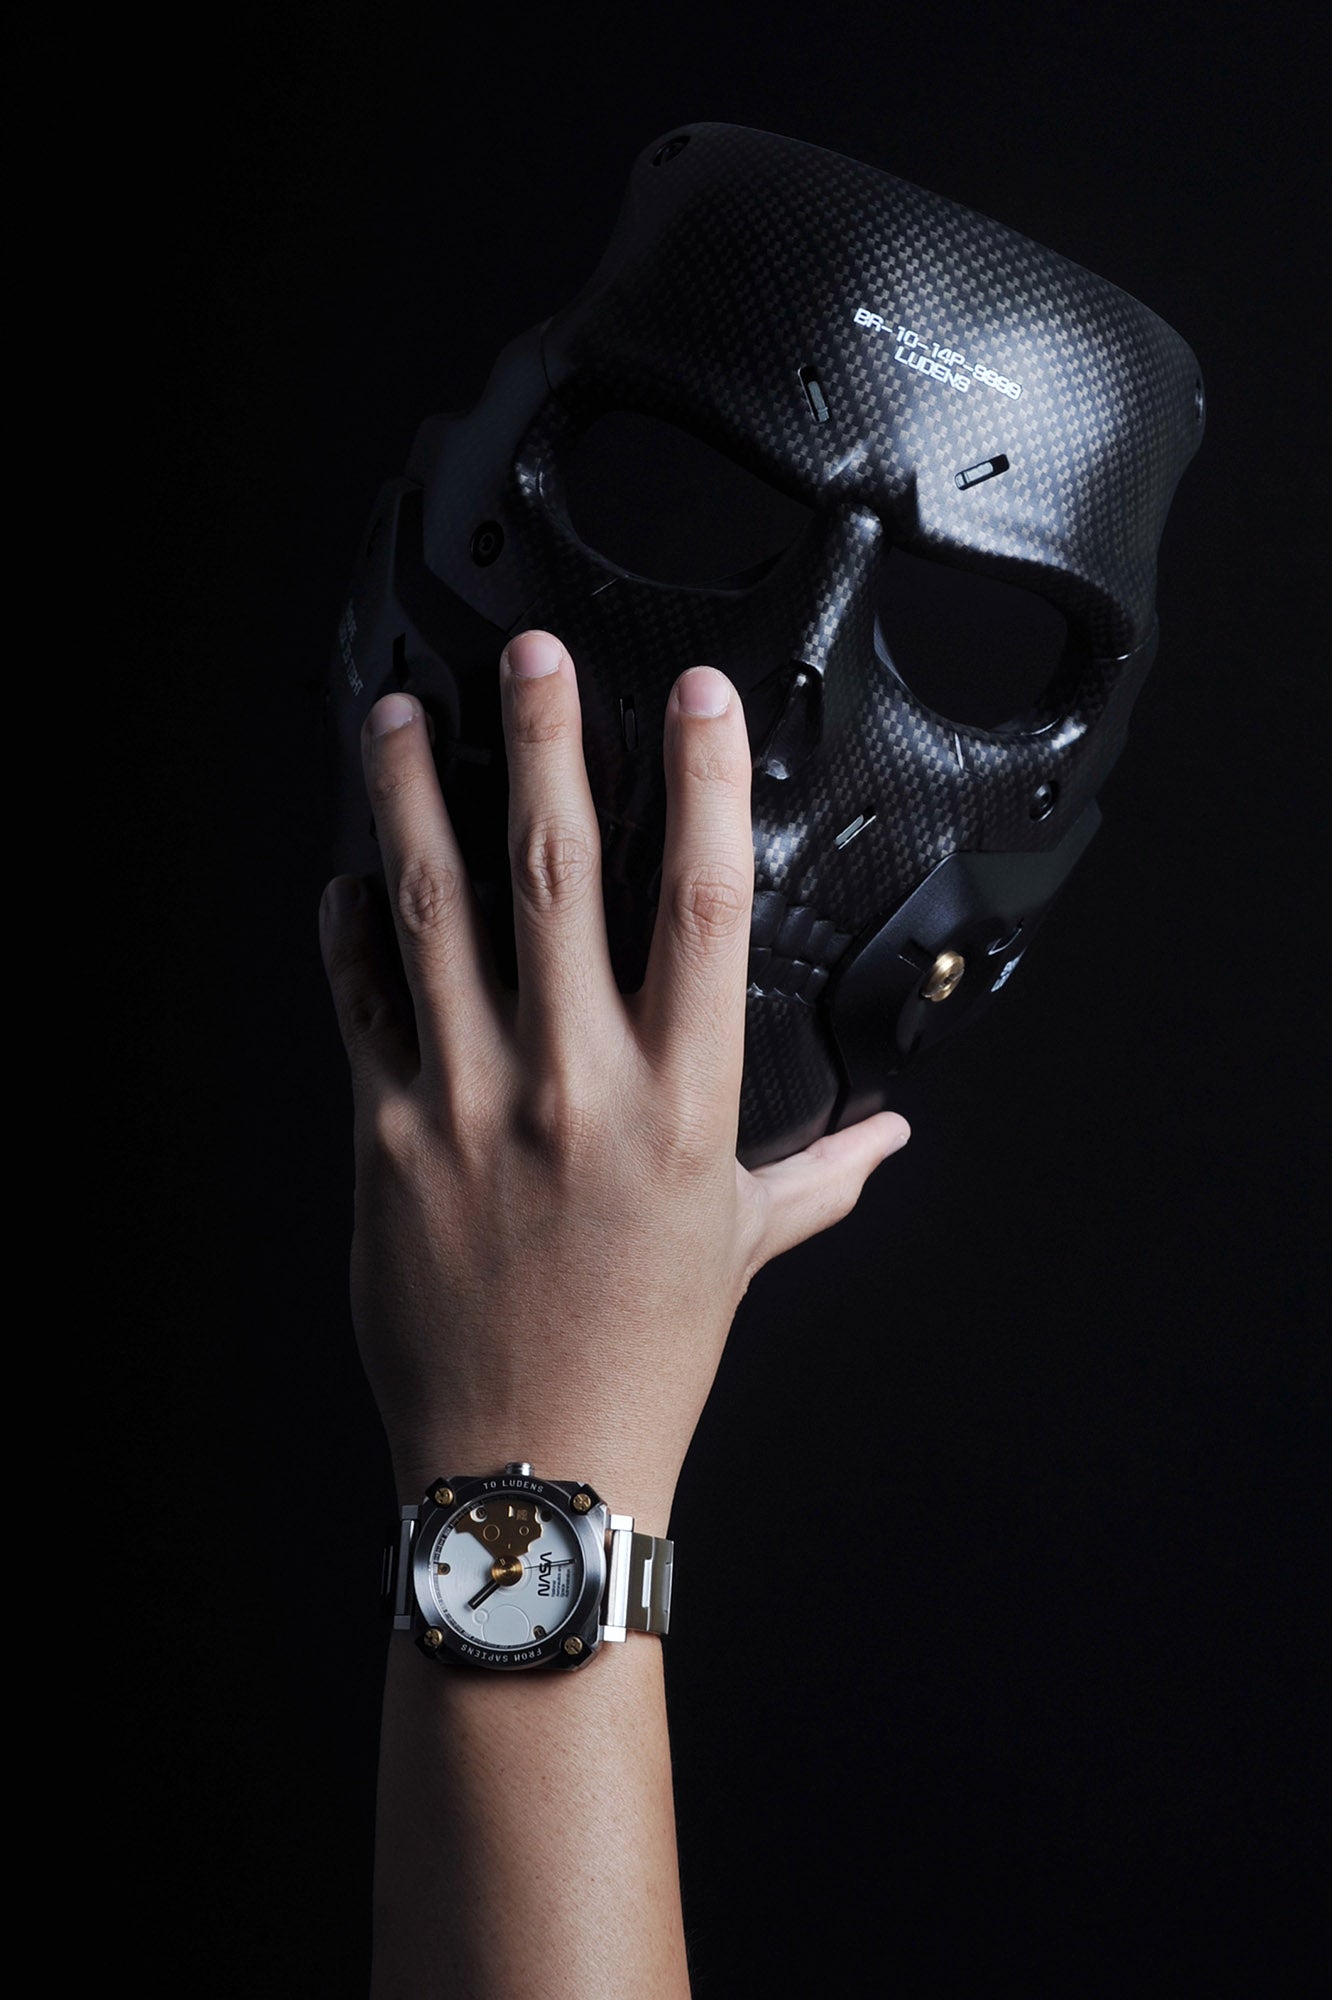 Exclusively included in the Rare Edition, Ludens Mask is a 1:1 life size collectible that is actually wearable – Everyone of us is Ludens. The skull mask is a very important motif for Ludens that is associated with human fossils and armor visor.